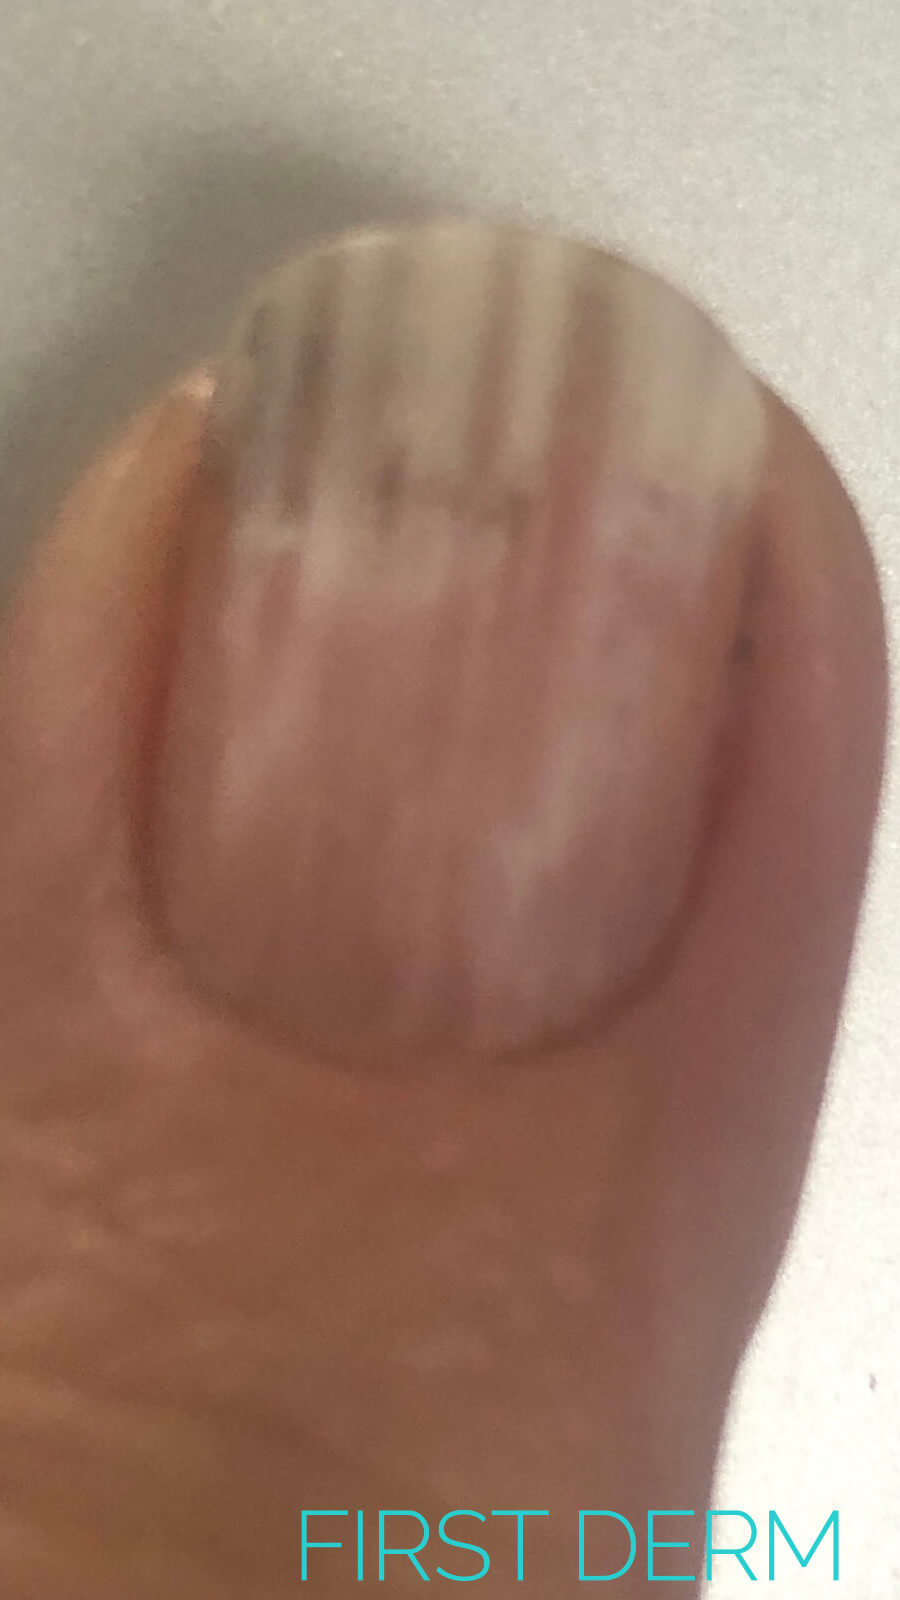 Common nail discoloration -